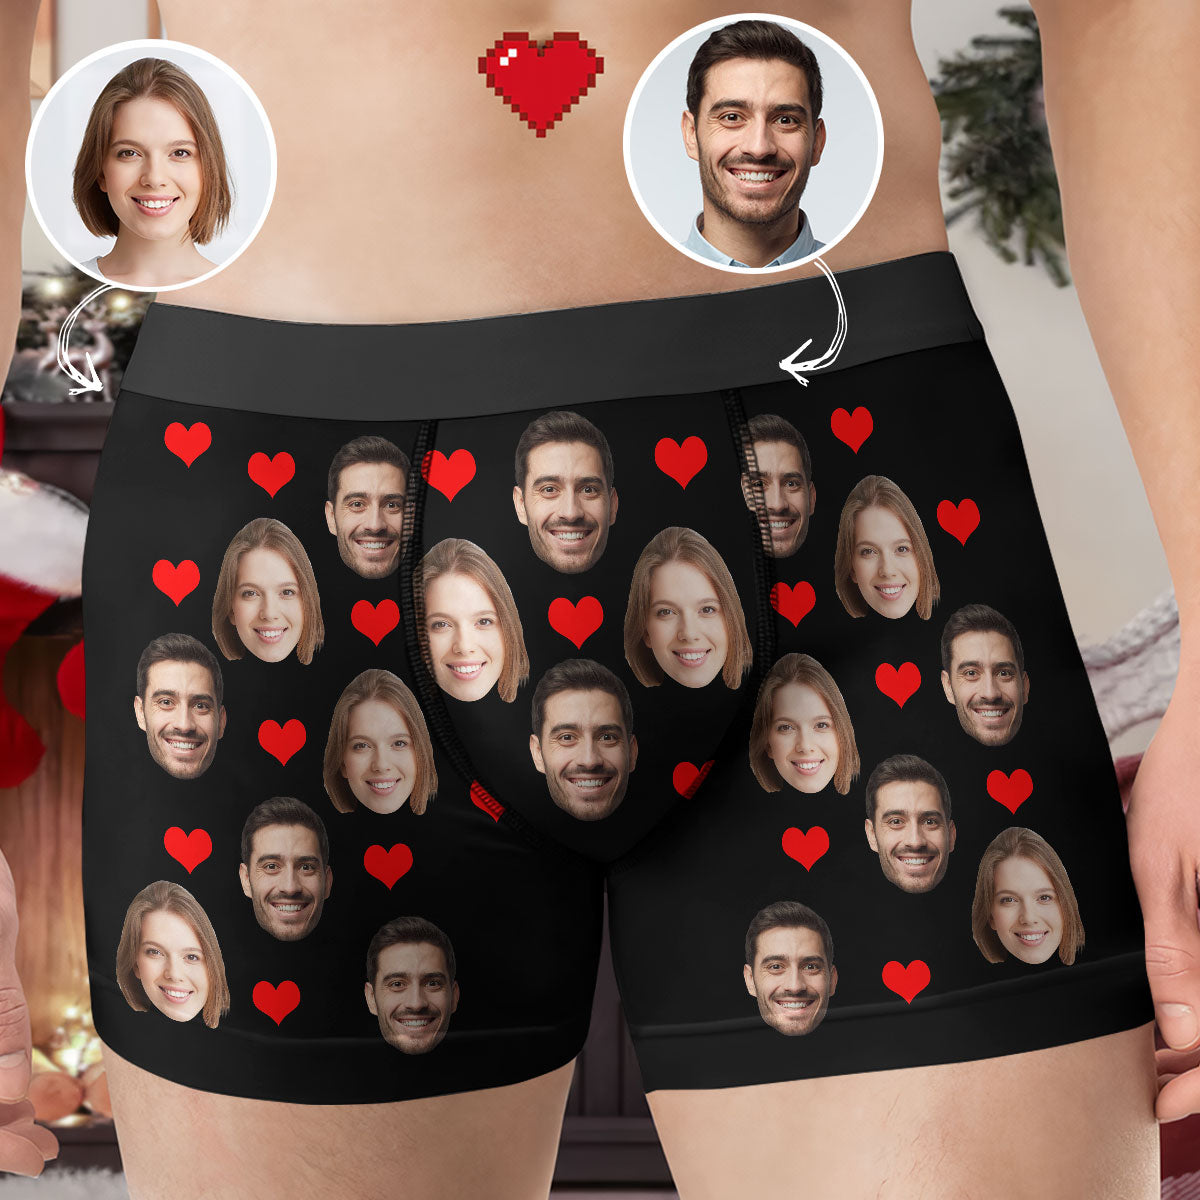 Personalized Boxer Briefs Custom Face Underwear, Men's Underwear Photo  Boxer Briefs, Valentine's Day Gift for Him/husband, Wedding Gift, 